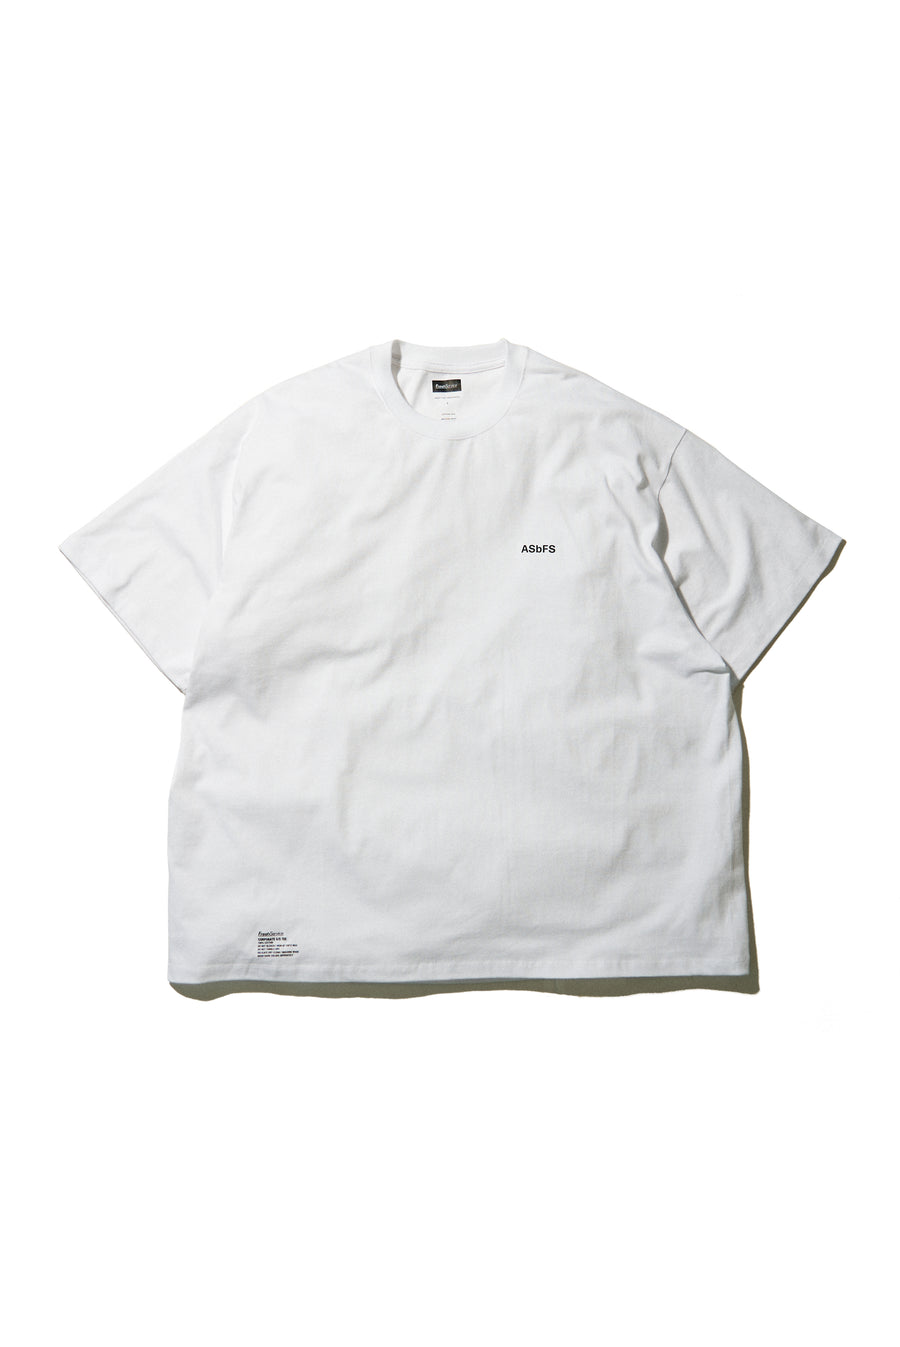 Actual Source × FS CORPORATE S/S TEE “ASbFS”